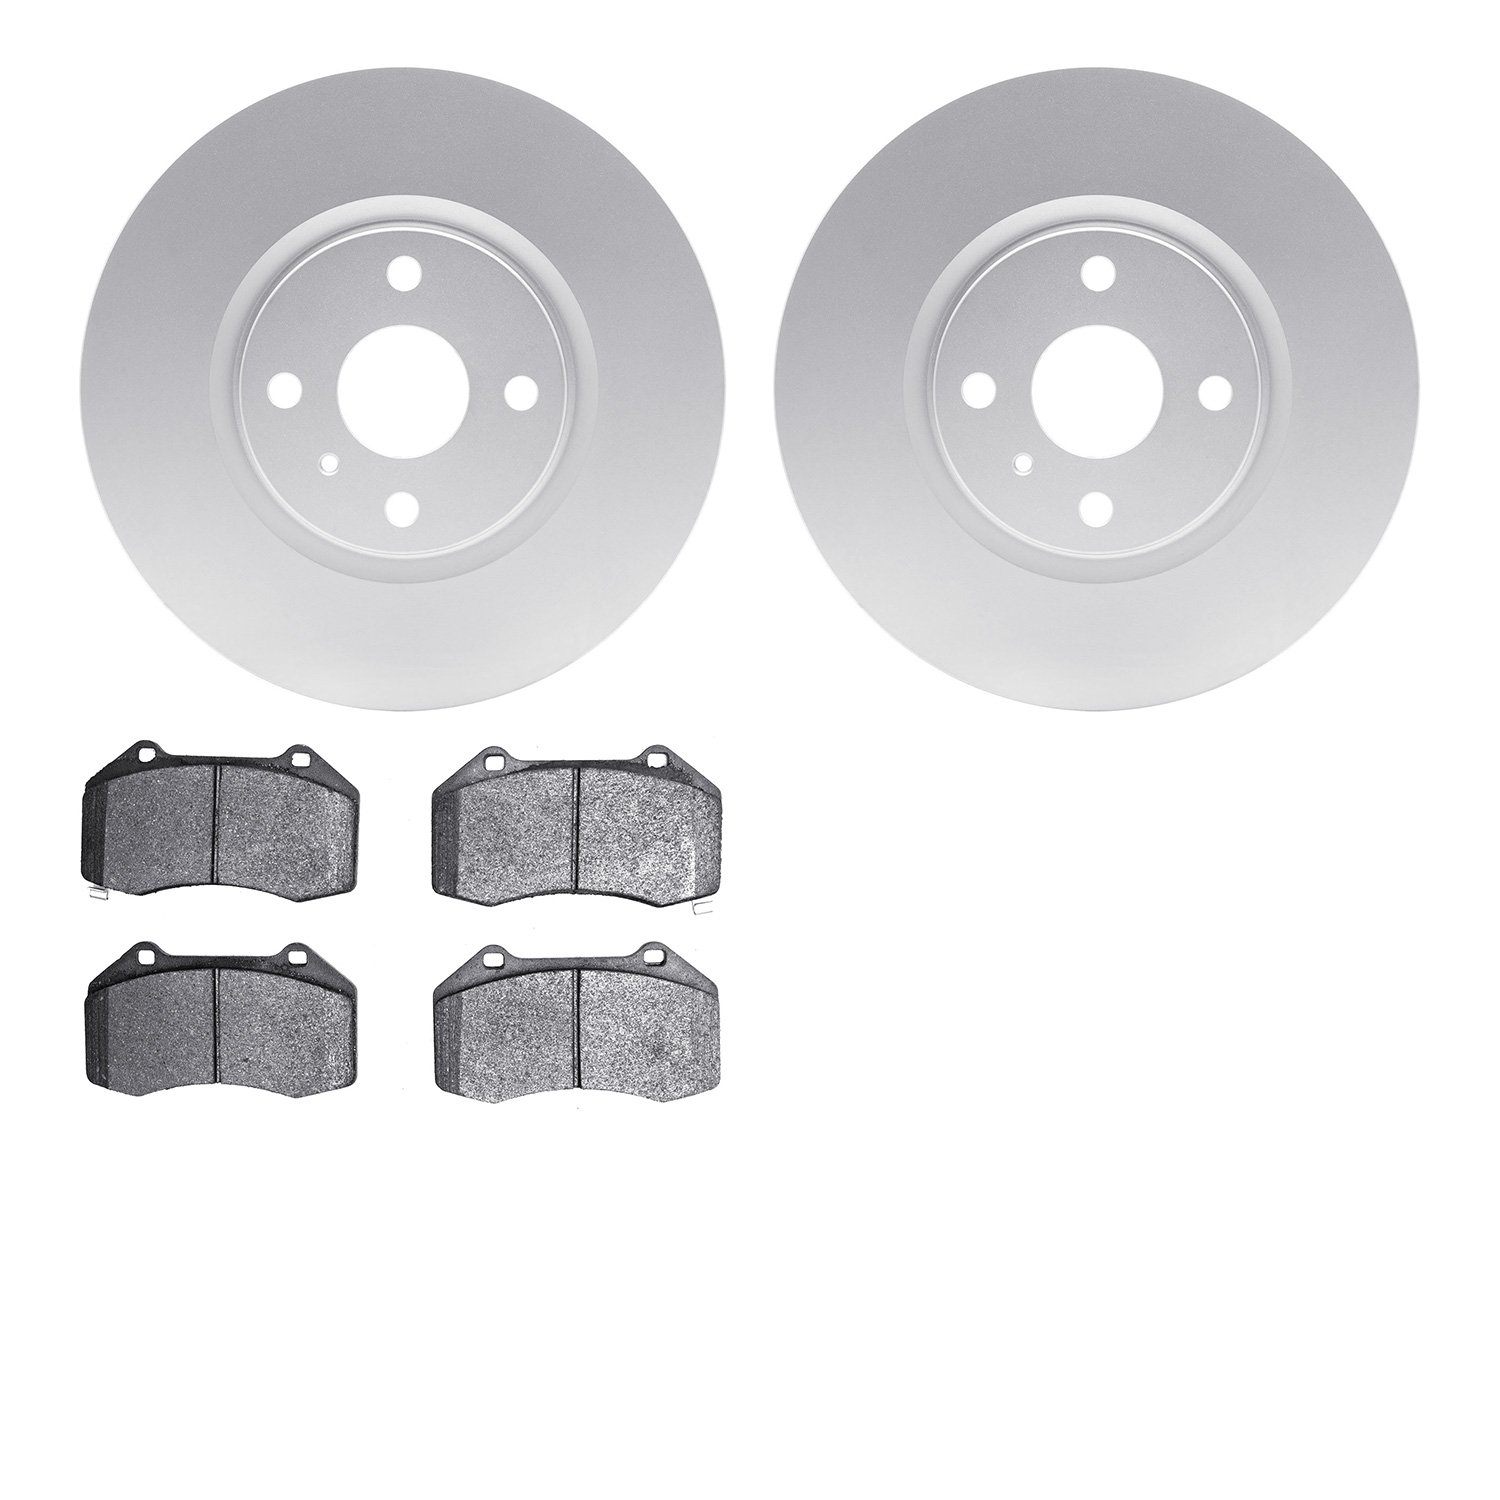 4302-80030 Geospec Brake Rotors with 3000-Series Ceramic Brake Pads Kit, Fits Select Multiple Makes/Models, Position: Front